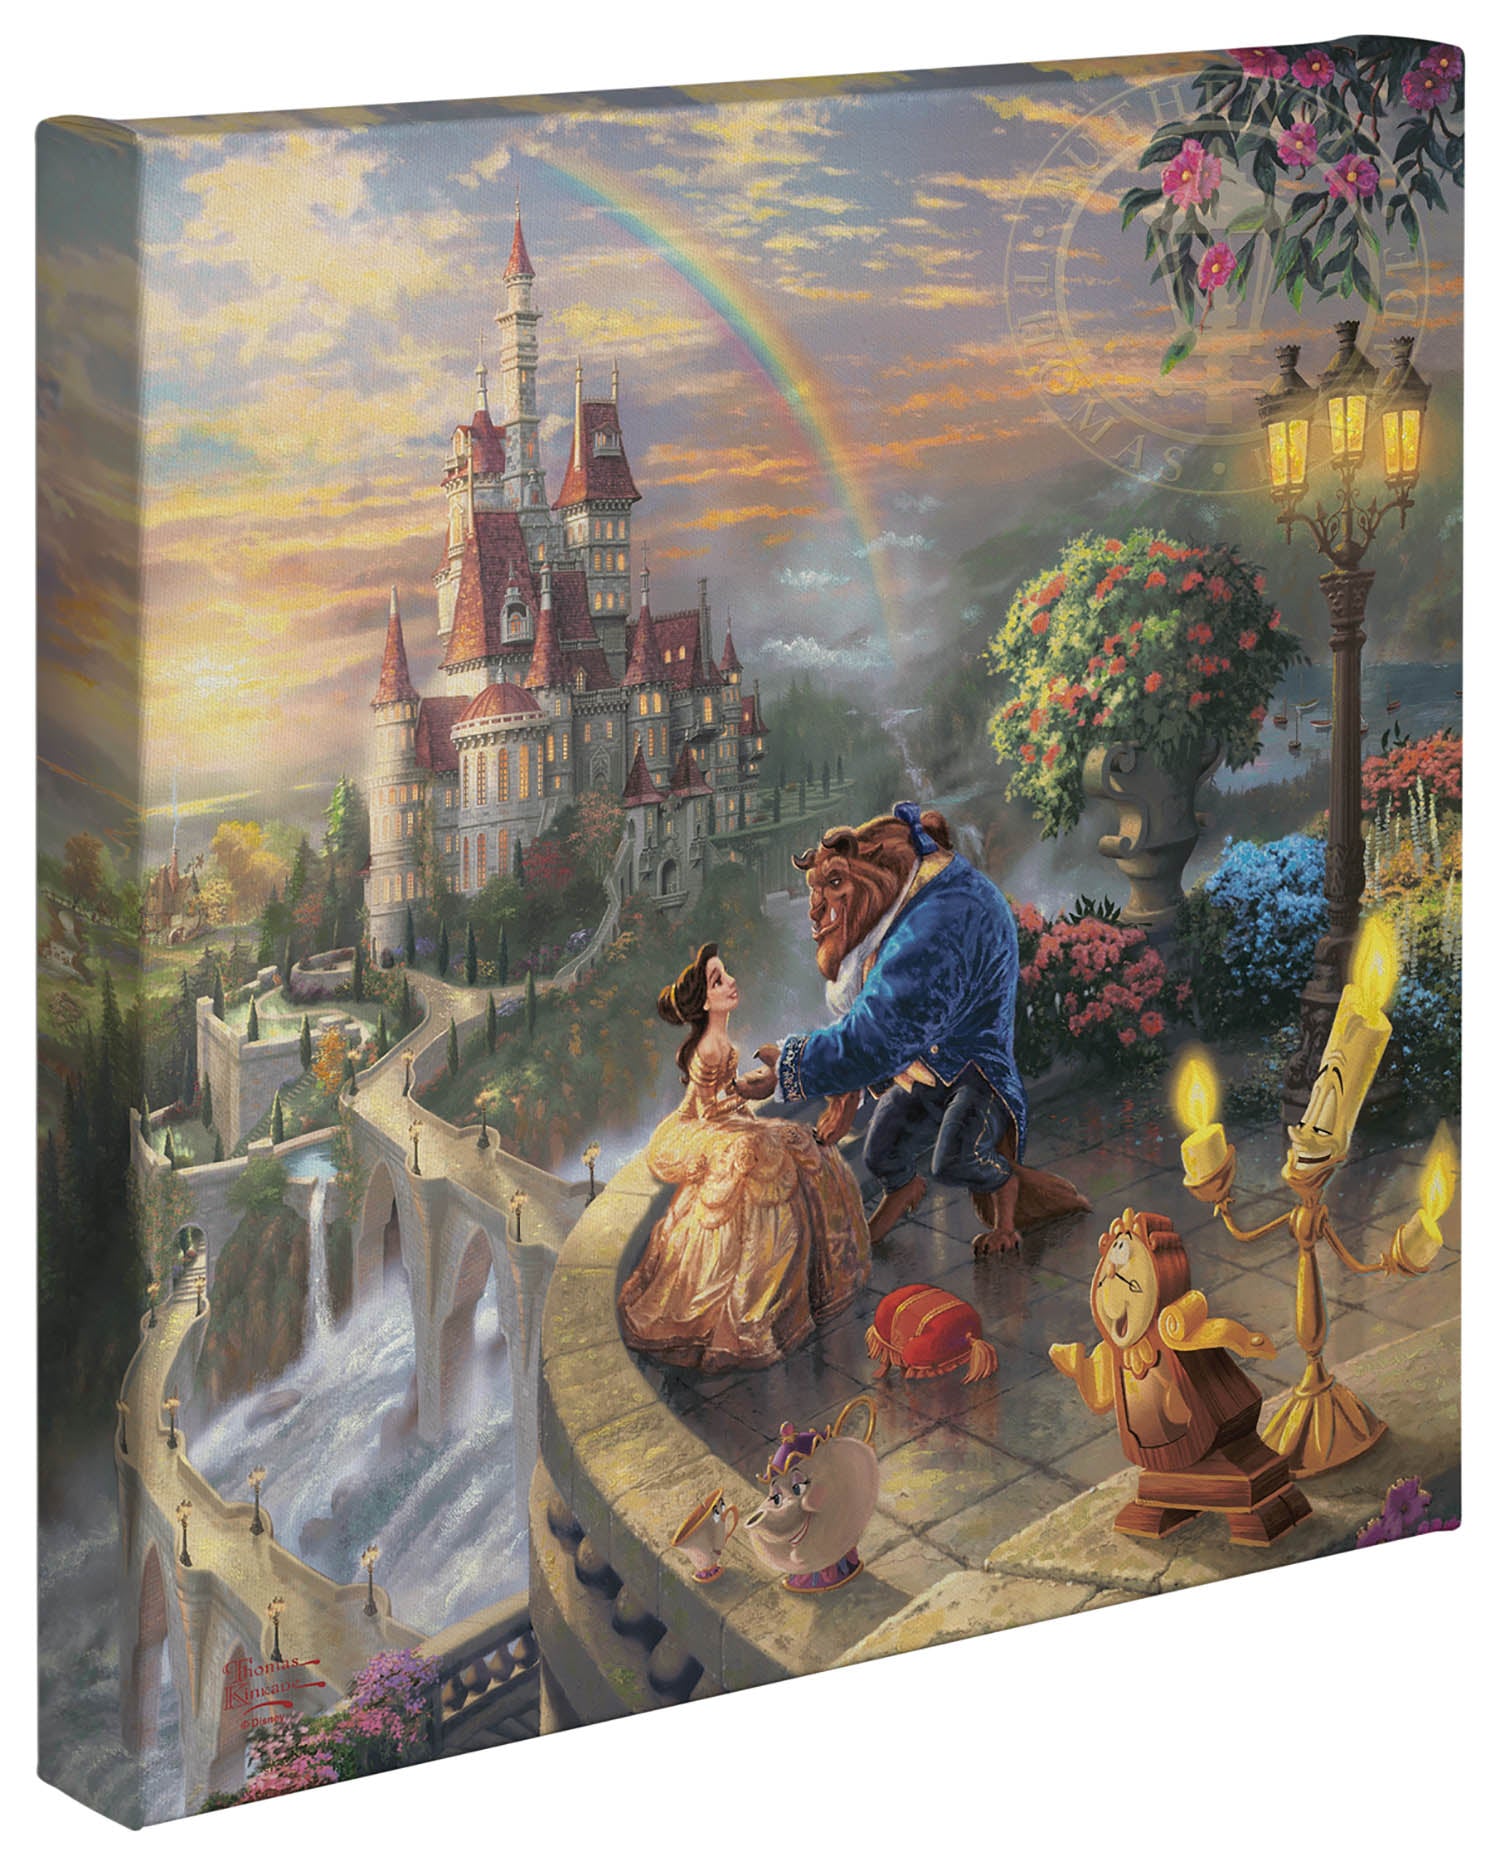  Beauty and the Beast Falling in Love – 14″ x 14″ Gallery Wrapped Canvas